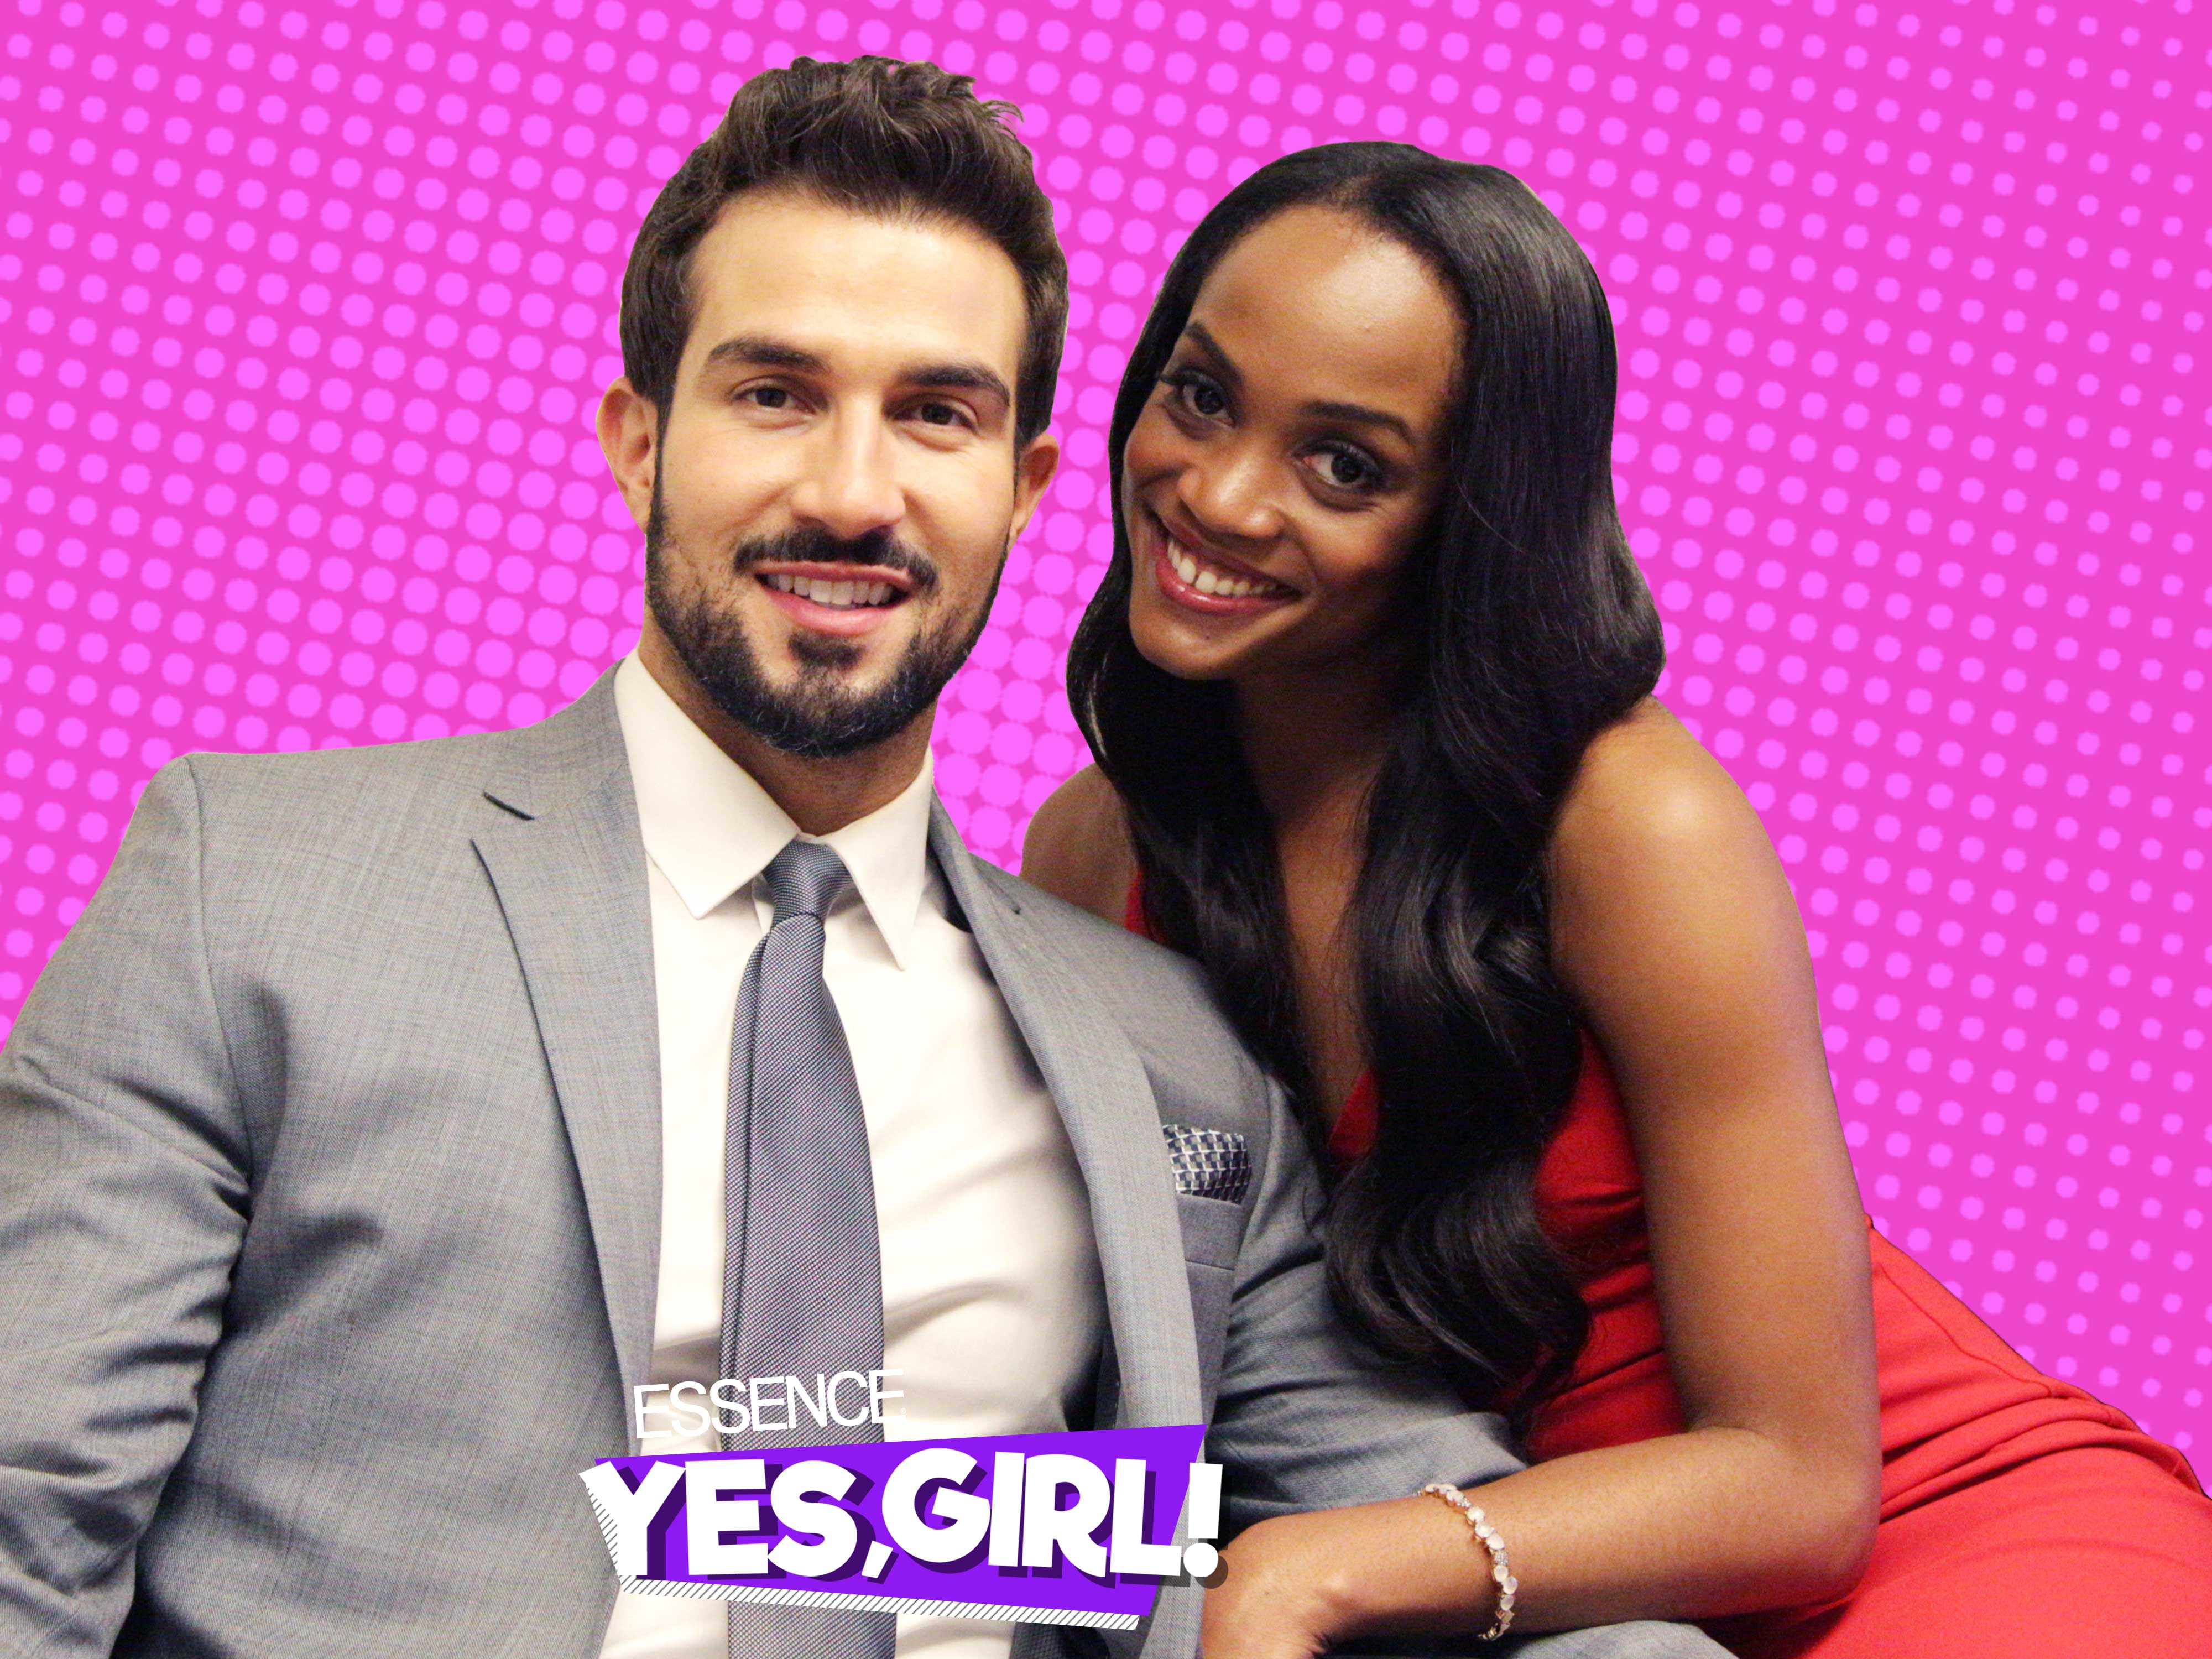 Why 'Bachelorette' Rachel Lindsay Chose Bryan: 'Peter Reminded Me A Lot Of My Ex'
